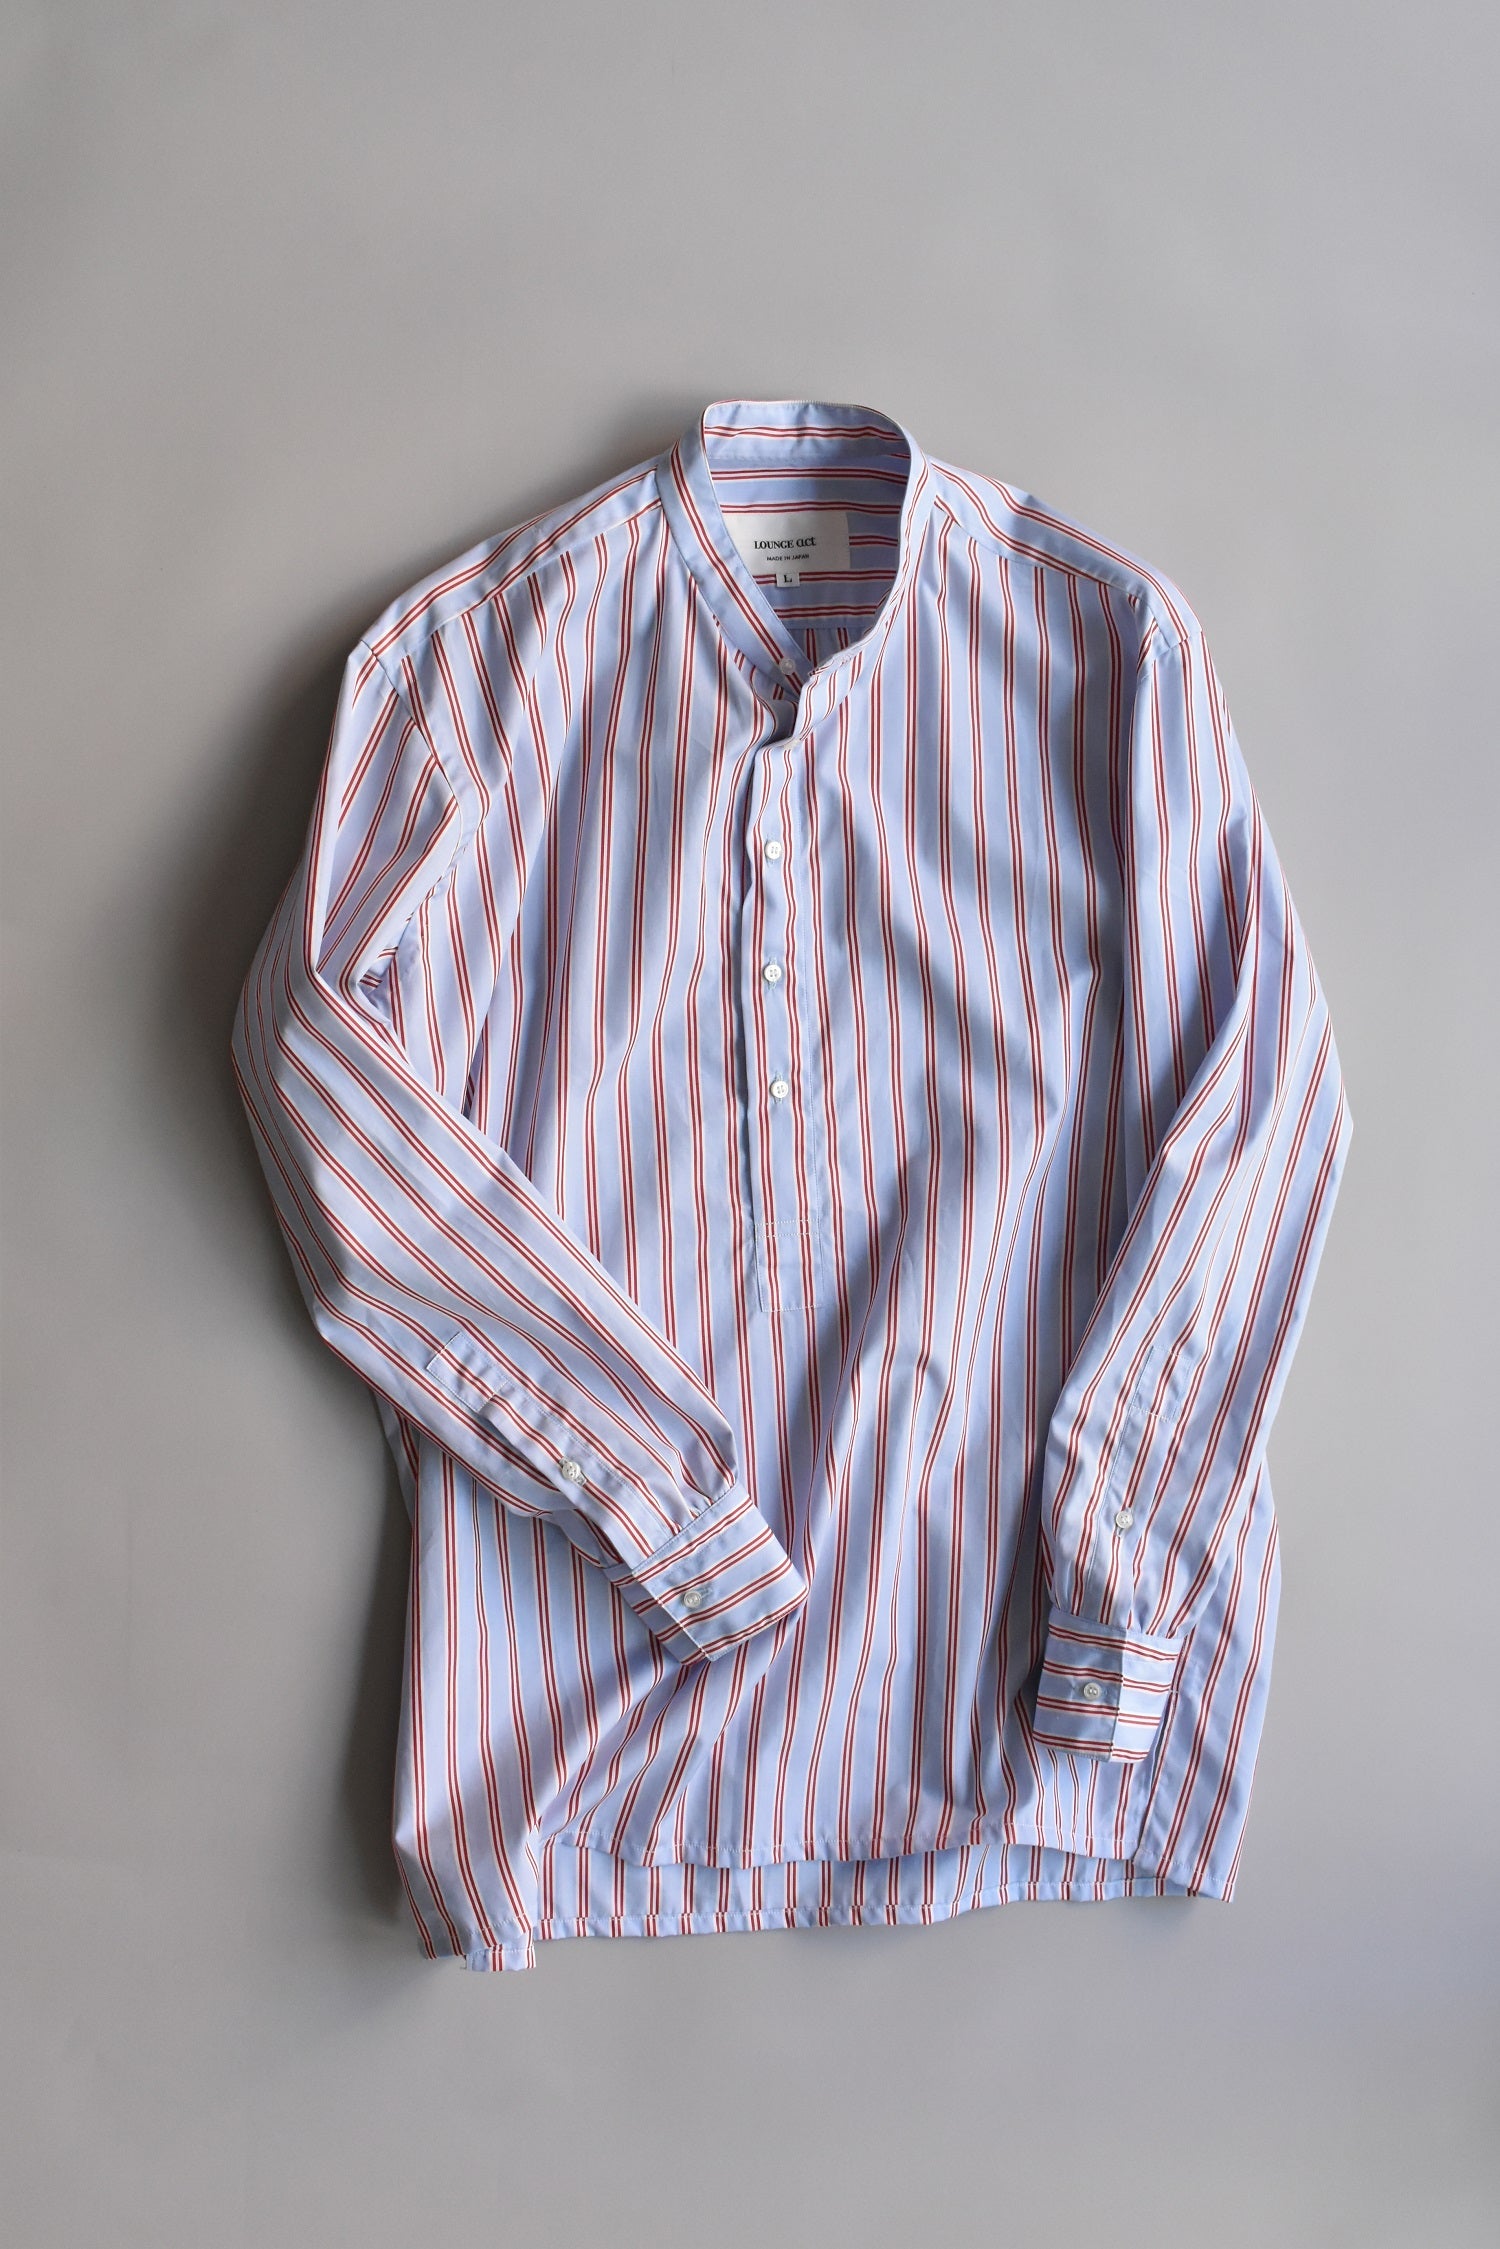 LOUNGE ACT / Pullover Dress Shirt [for Auba Jaconelli]